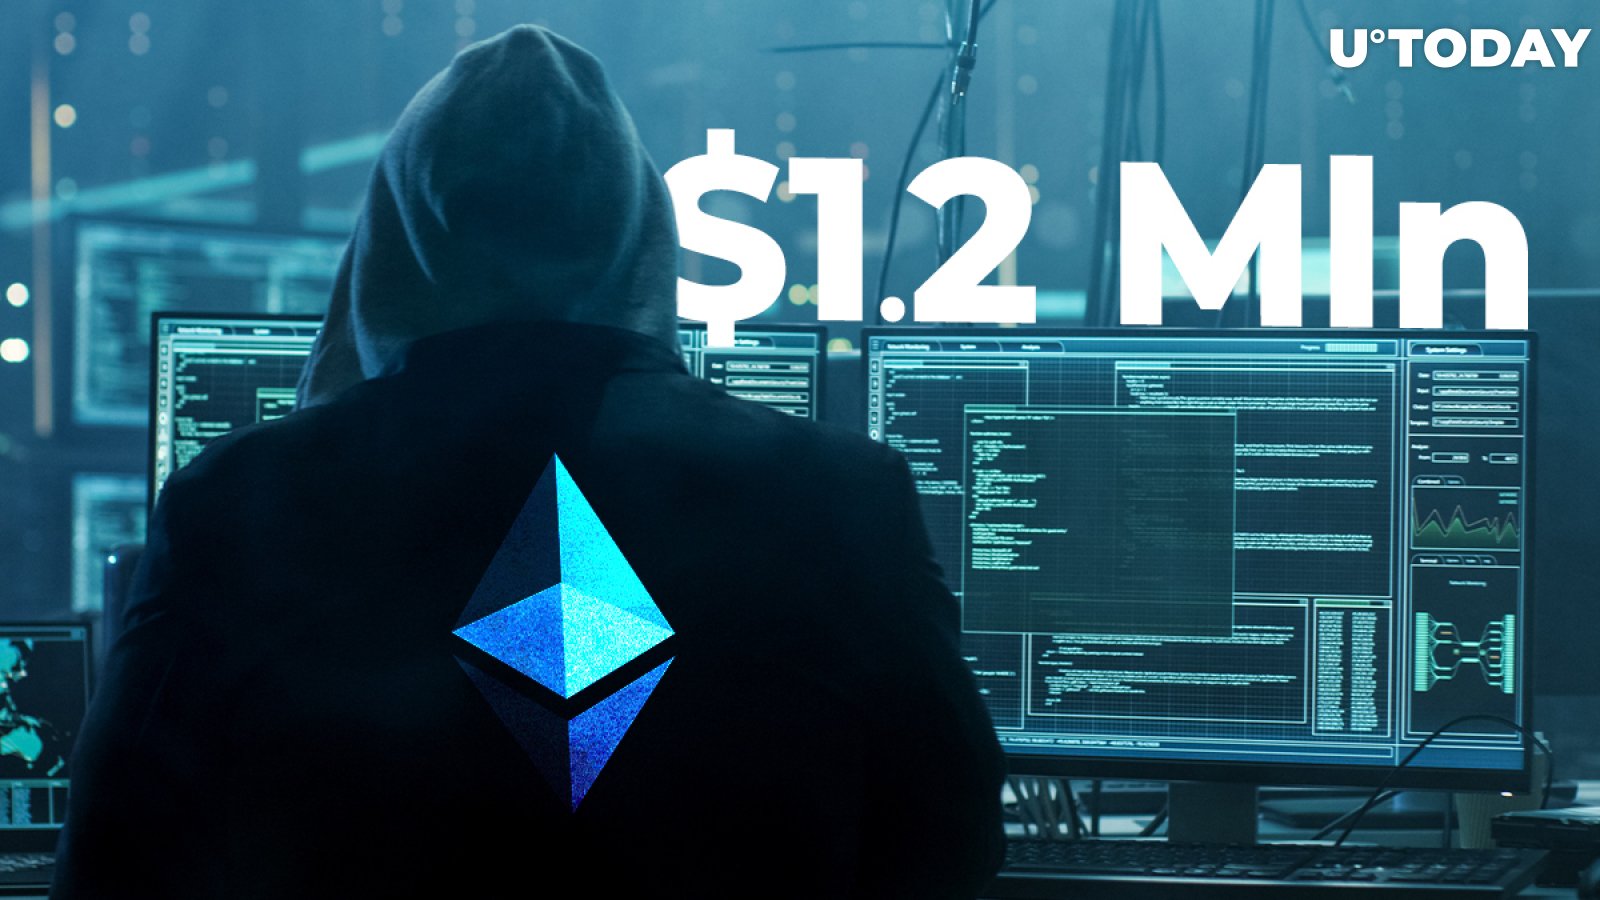 Hackers Move $1.2 Mln ETH from Crypto Stolen from Upbit in November 2019